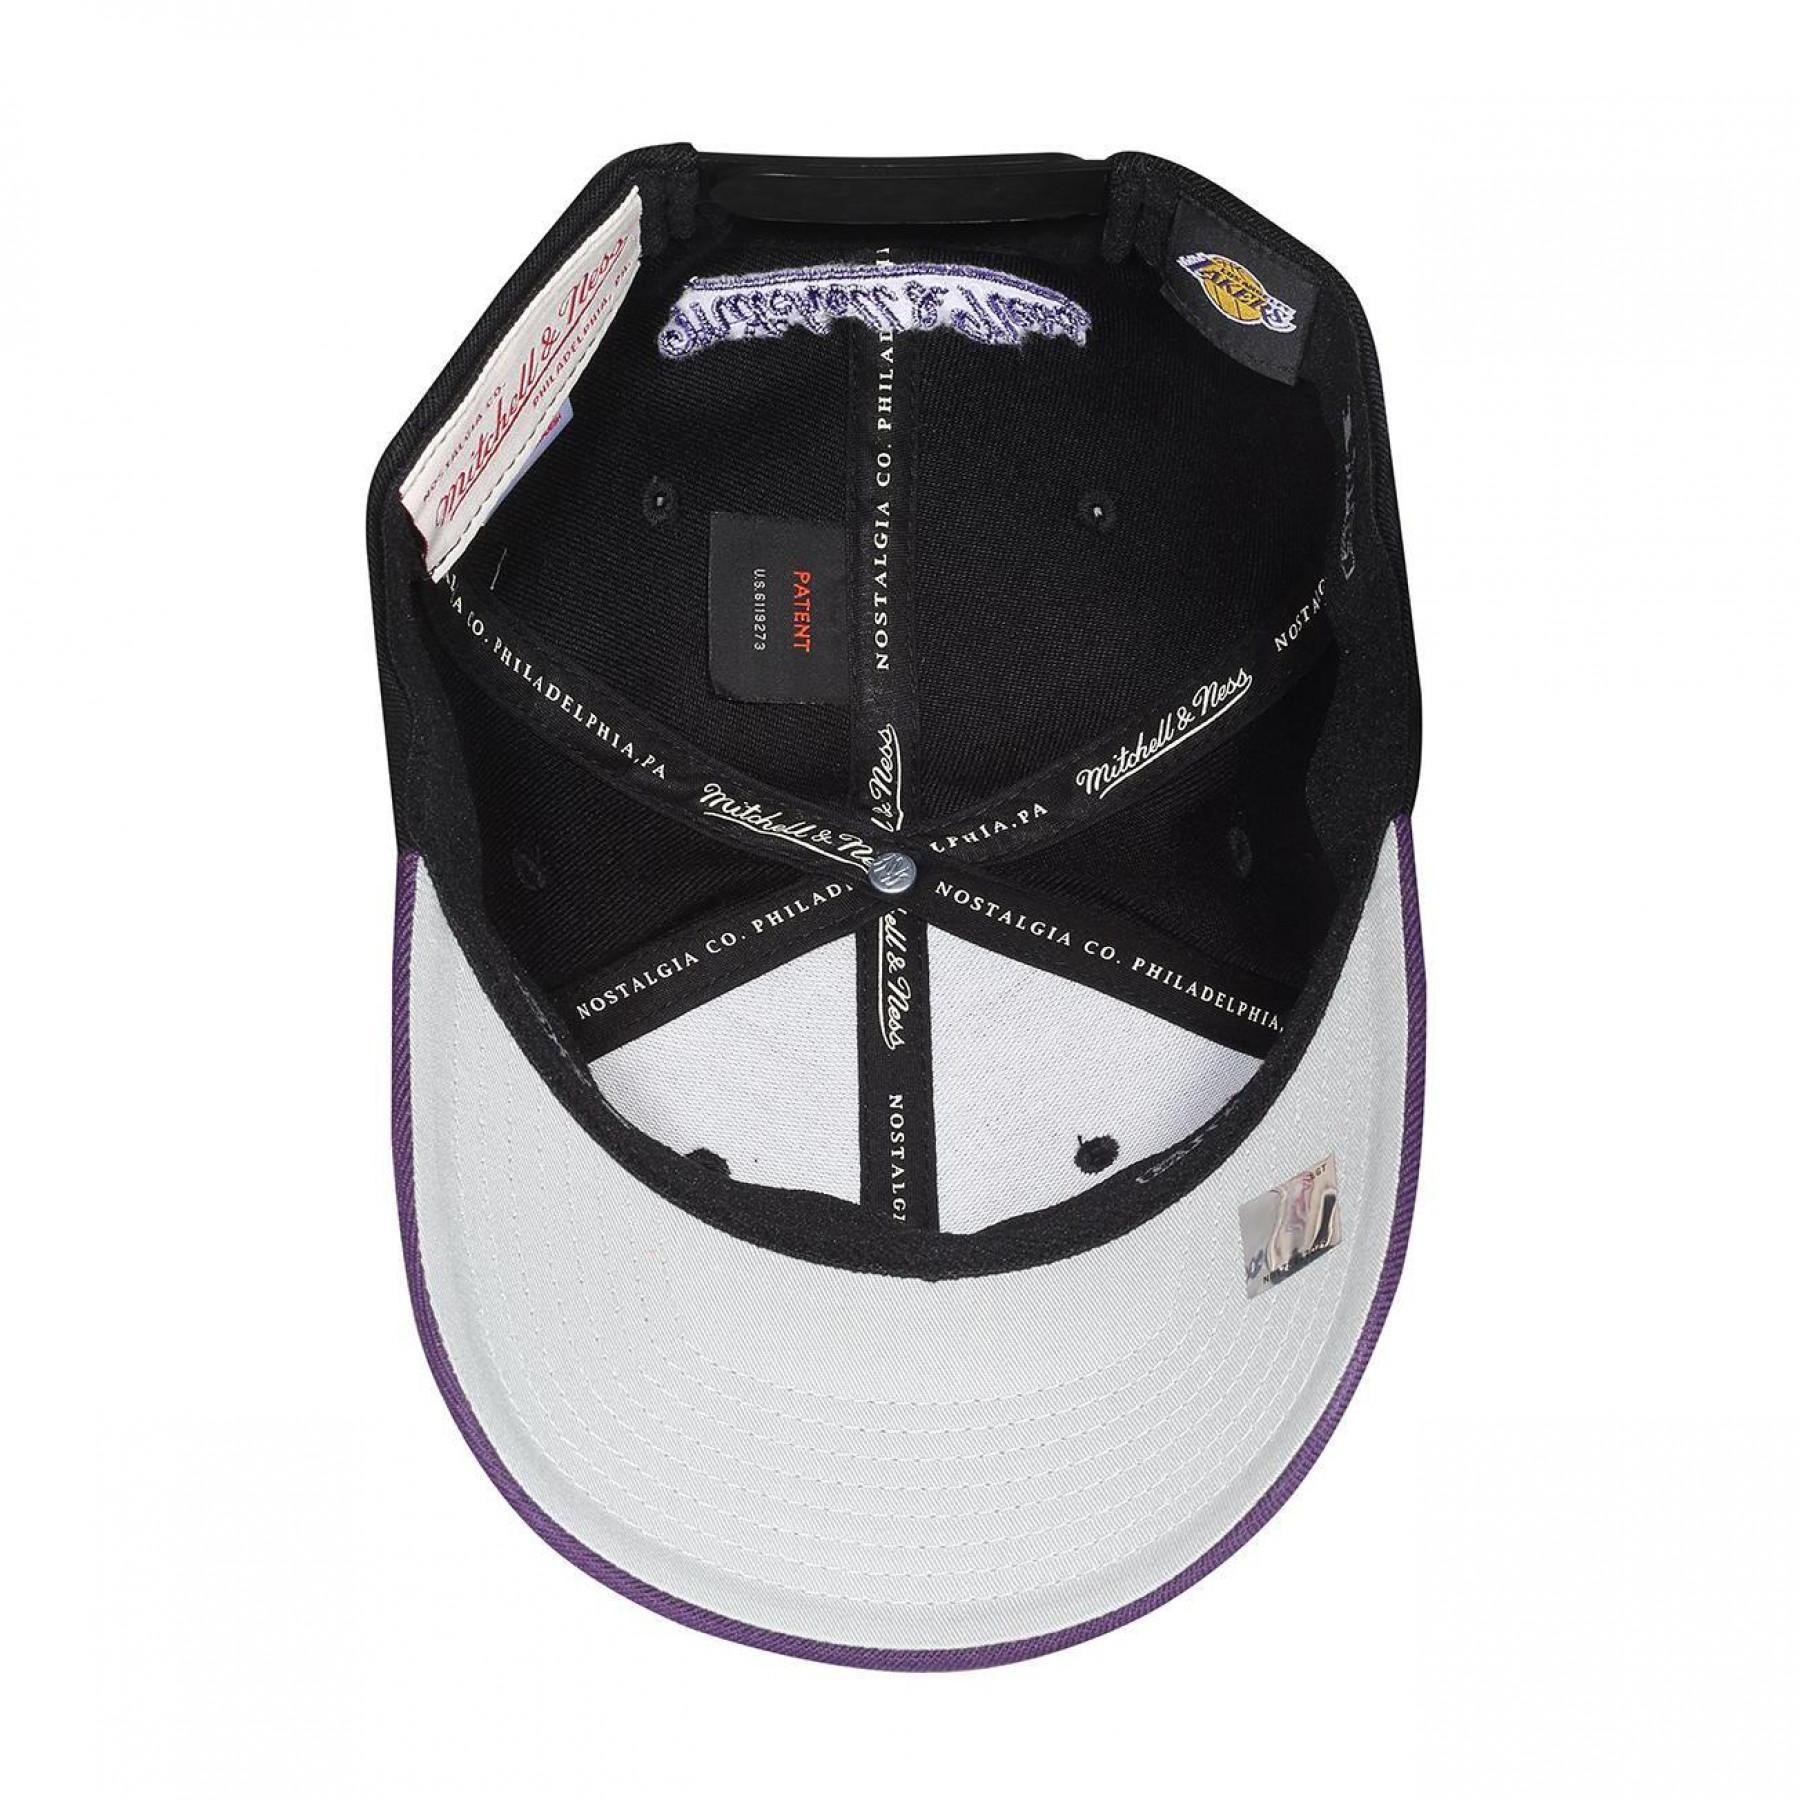 Cap Mitchell & Ness Tone 11 Lakers